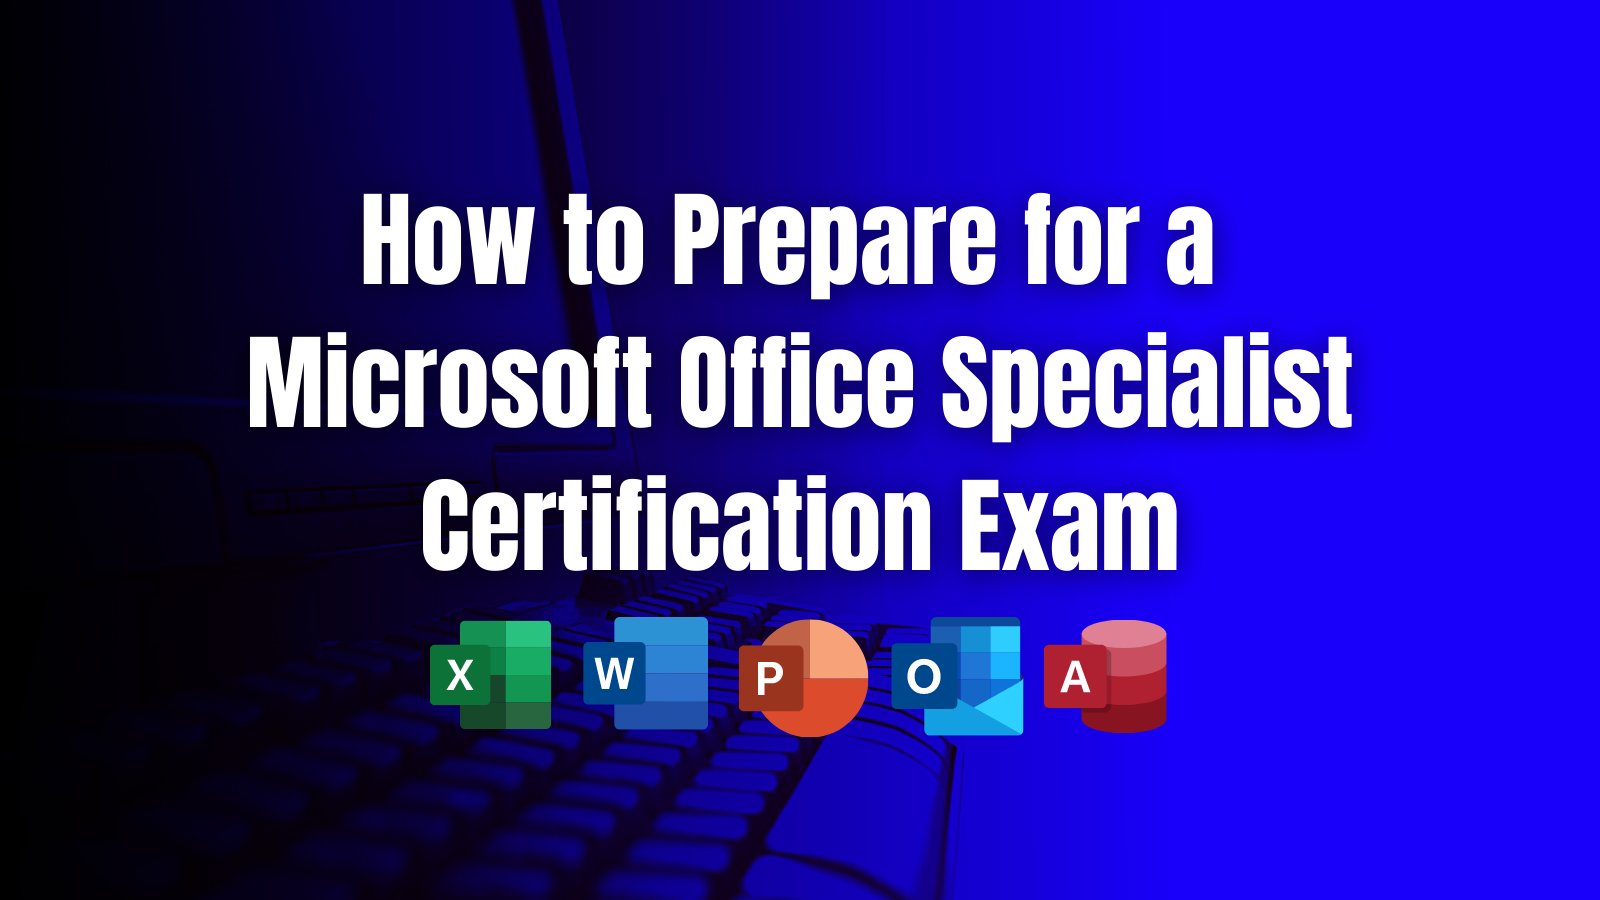 How to Prepare for a Microsoft Office Specialist Certification